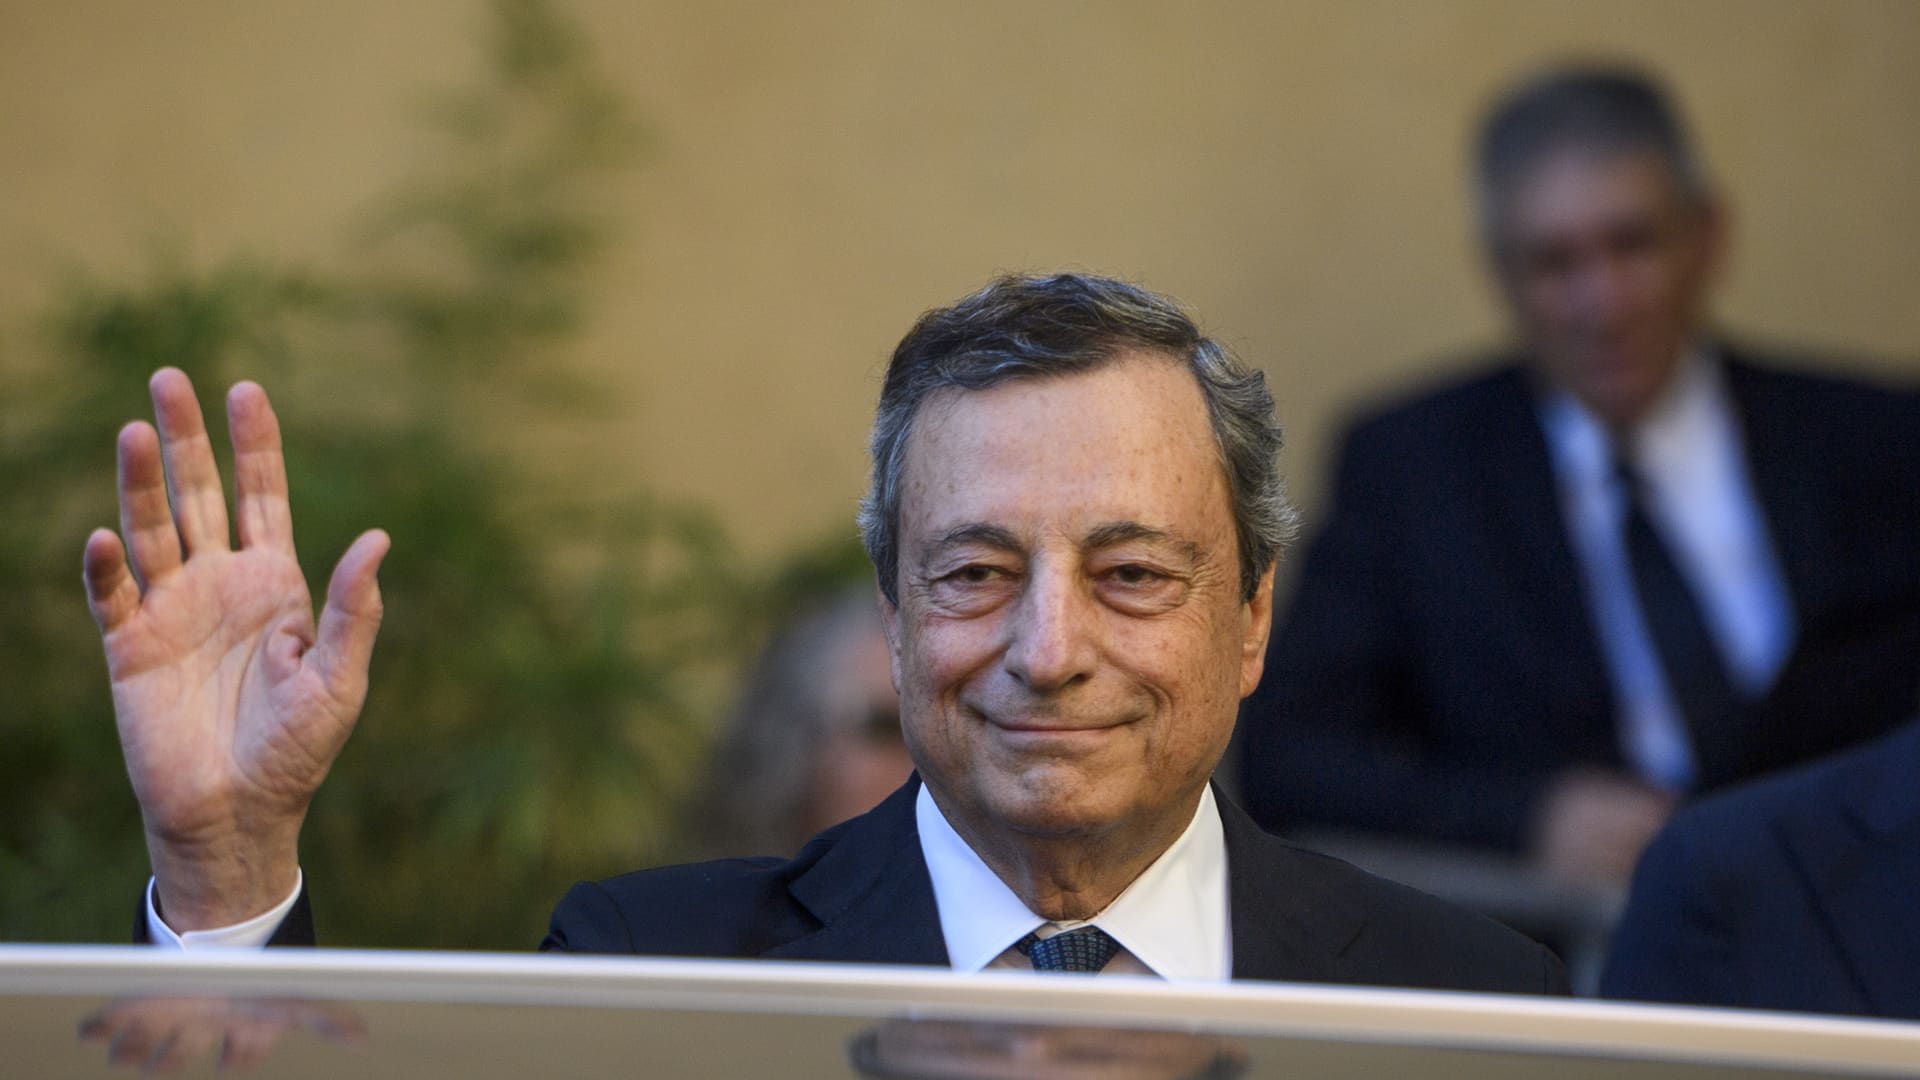 Italian bonds push higher as PM Mario Draghi suggests he'll stay in power